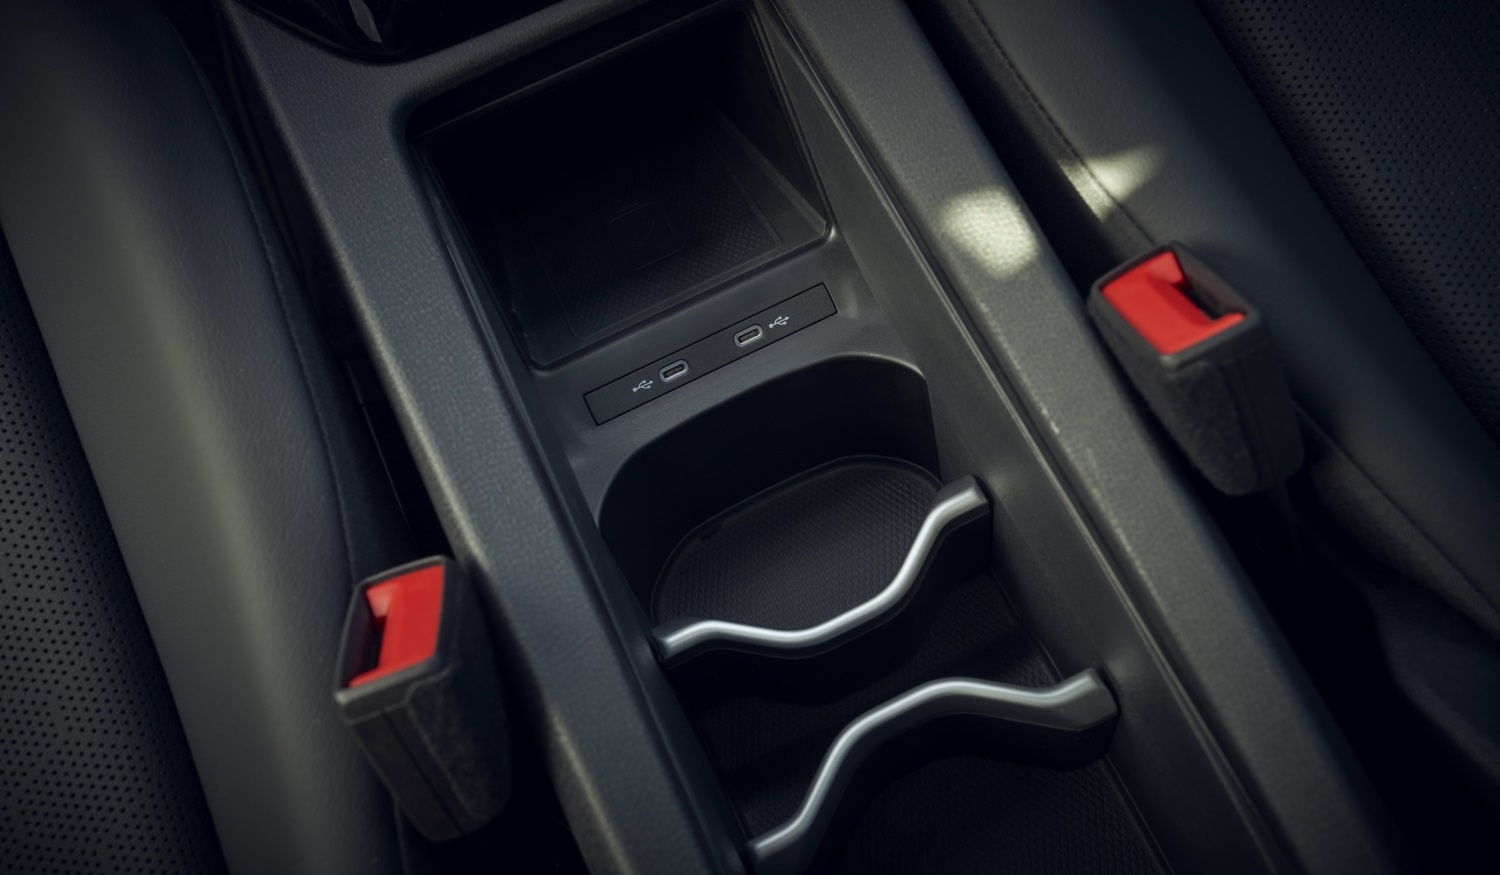 Between the front seats is a clever and convertable cupholder space.